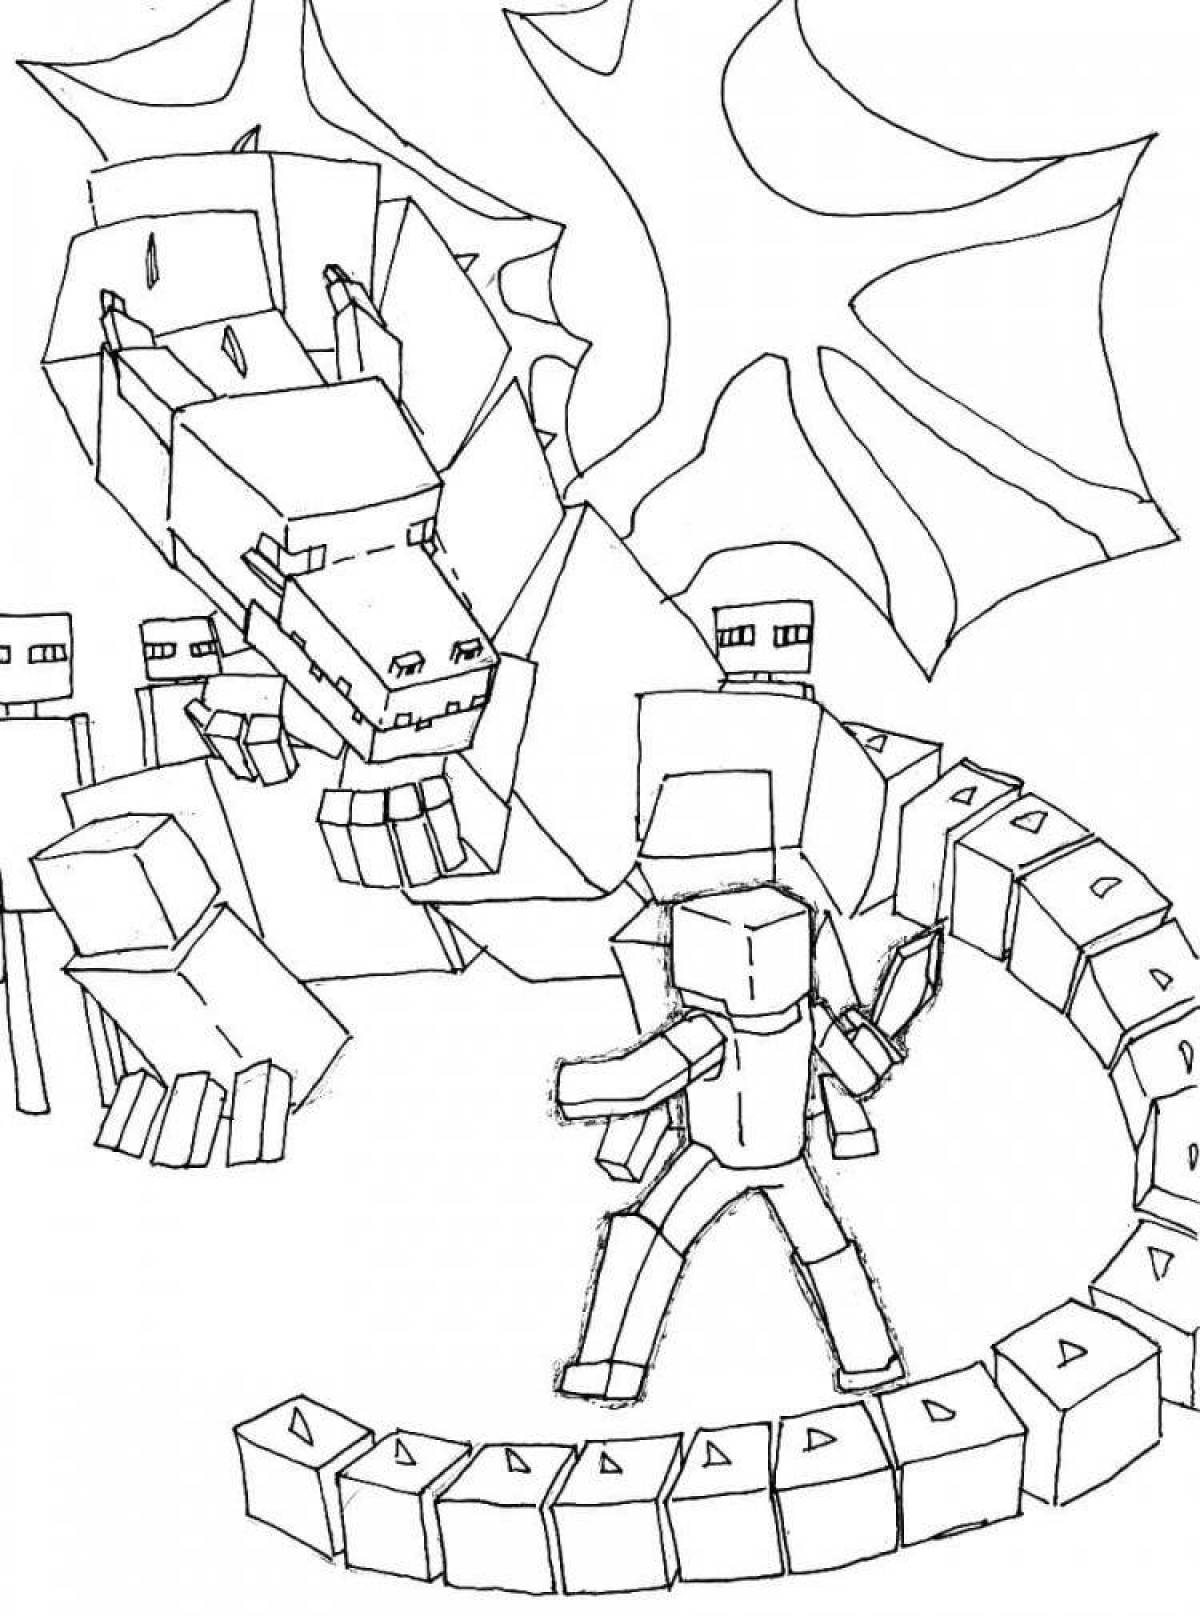 Ender dragon colorfully illustrated coloring page